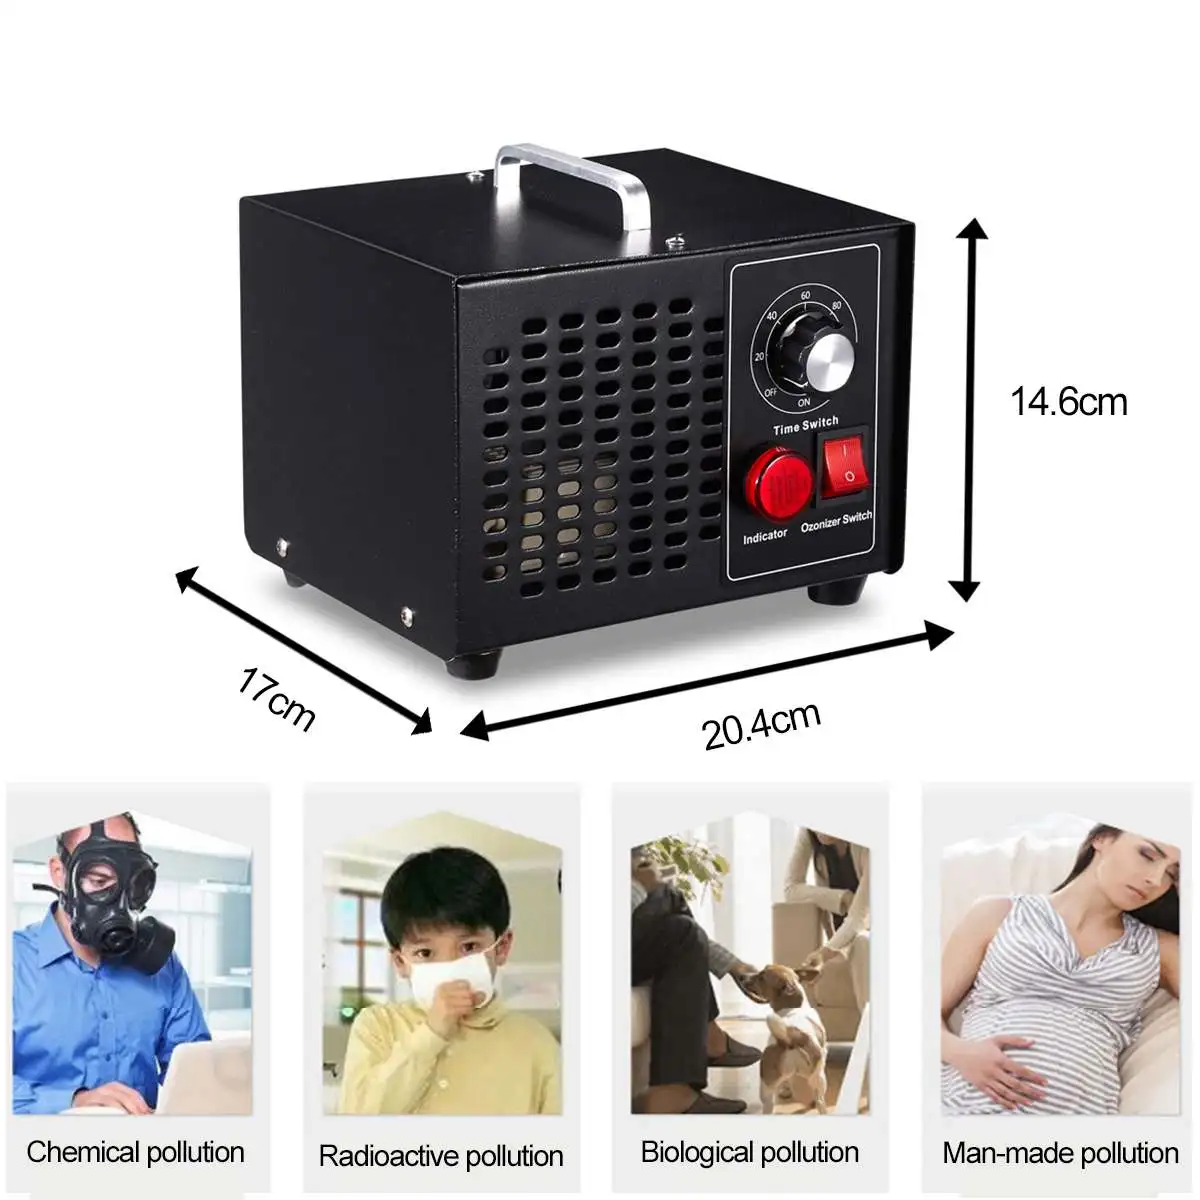 

AC110/220V Ozone Generator Air Cleaner Ozono Disinfection Sterilization O3 Ozonizer Cleaning Formaldehy Air Purifier with Timing